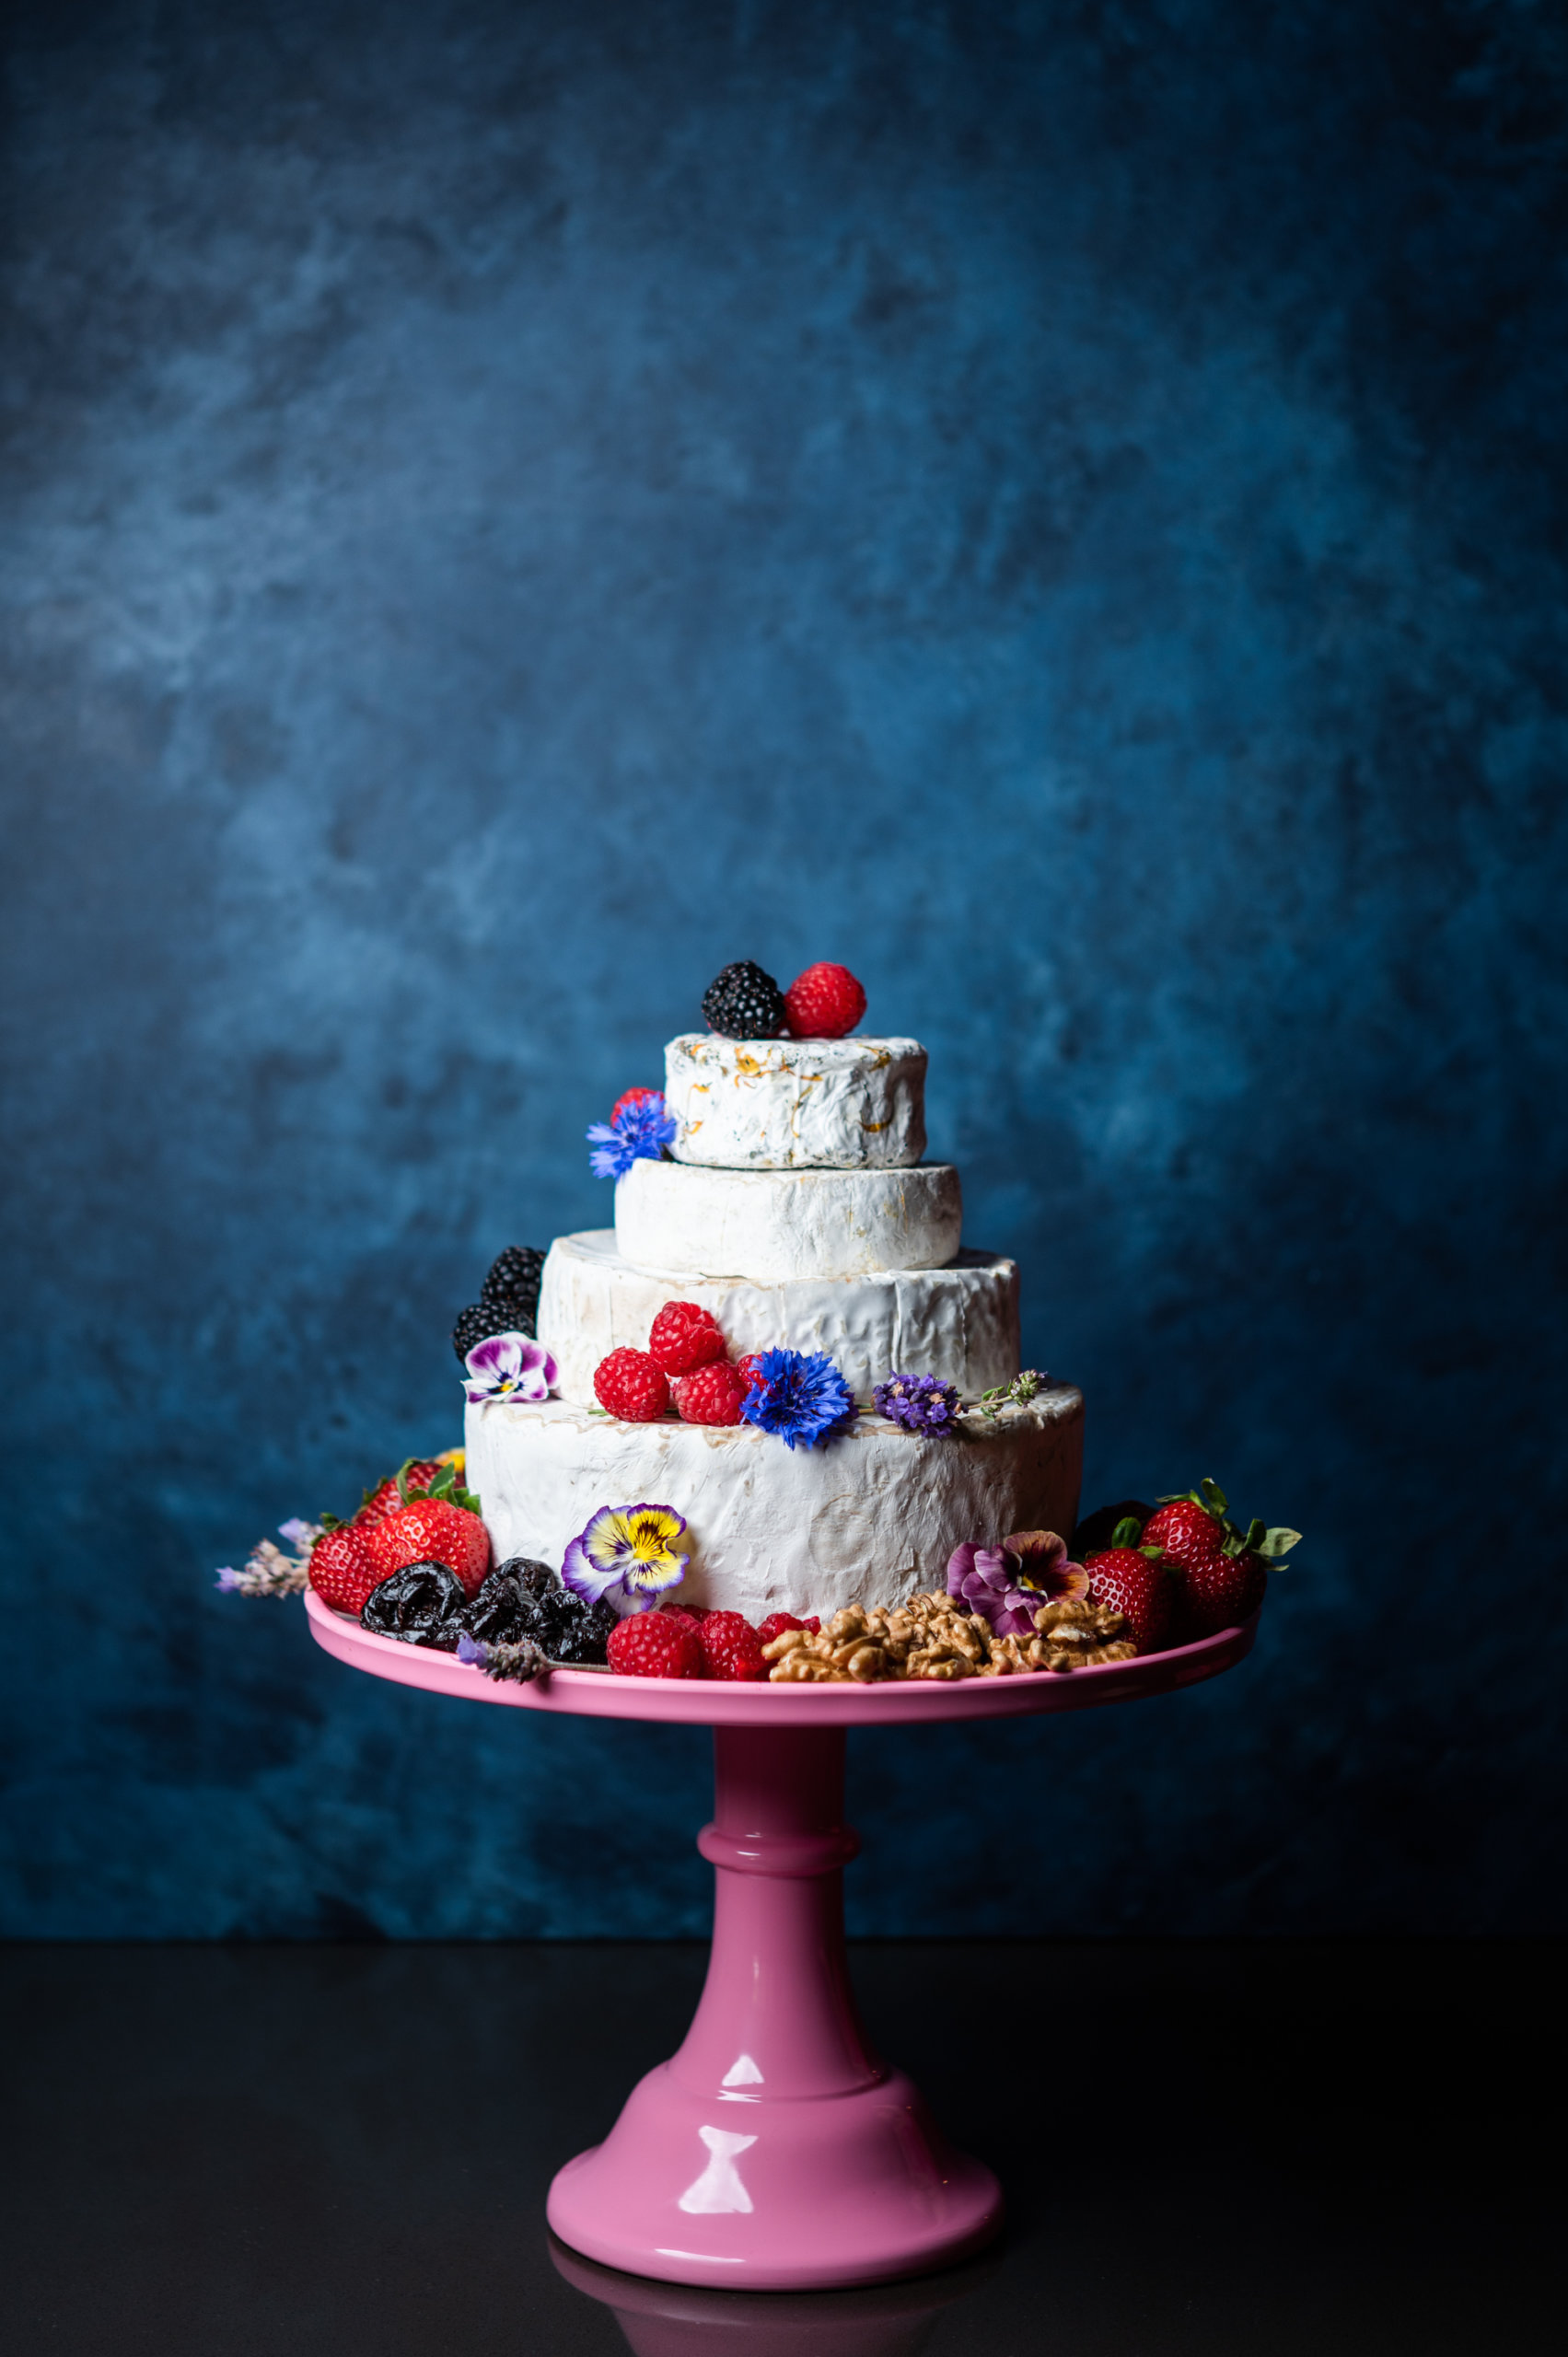 A cake with four tiers of California-made cheese, decorated with produce and California prunes